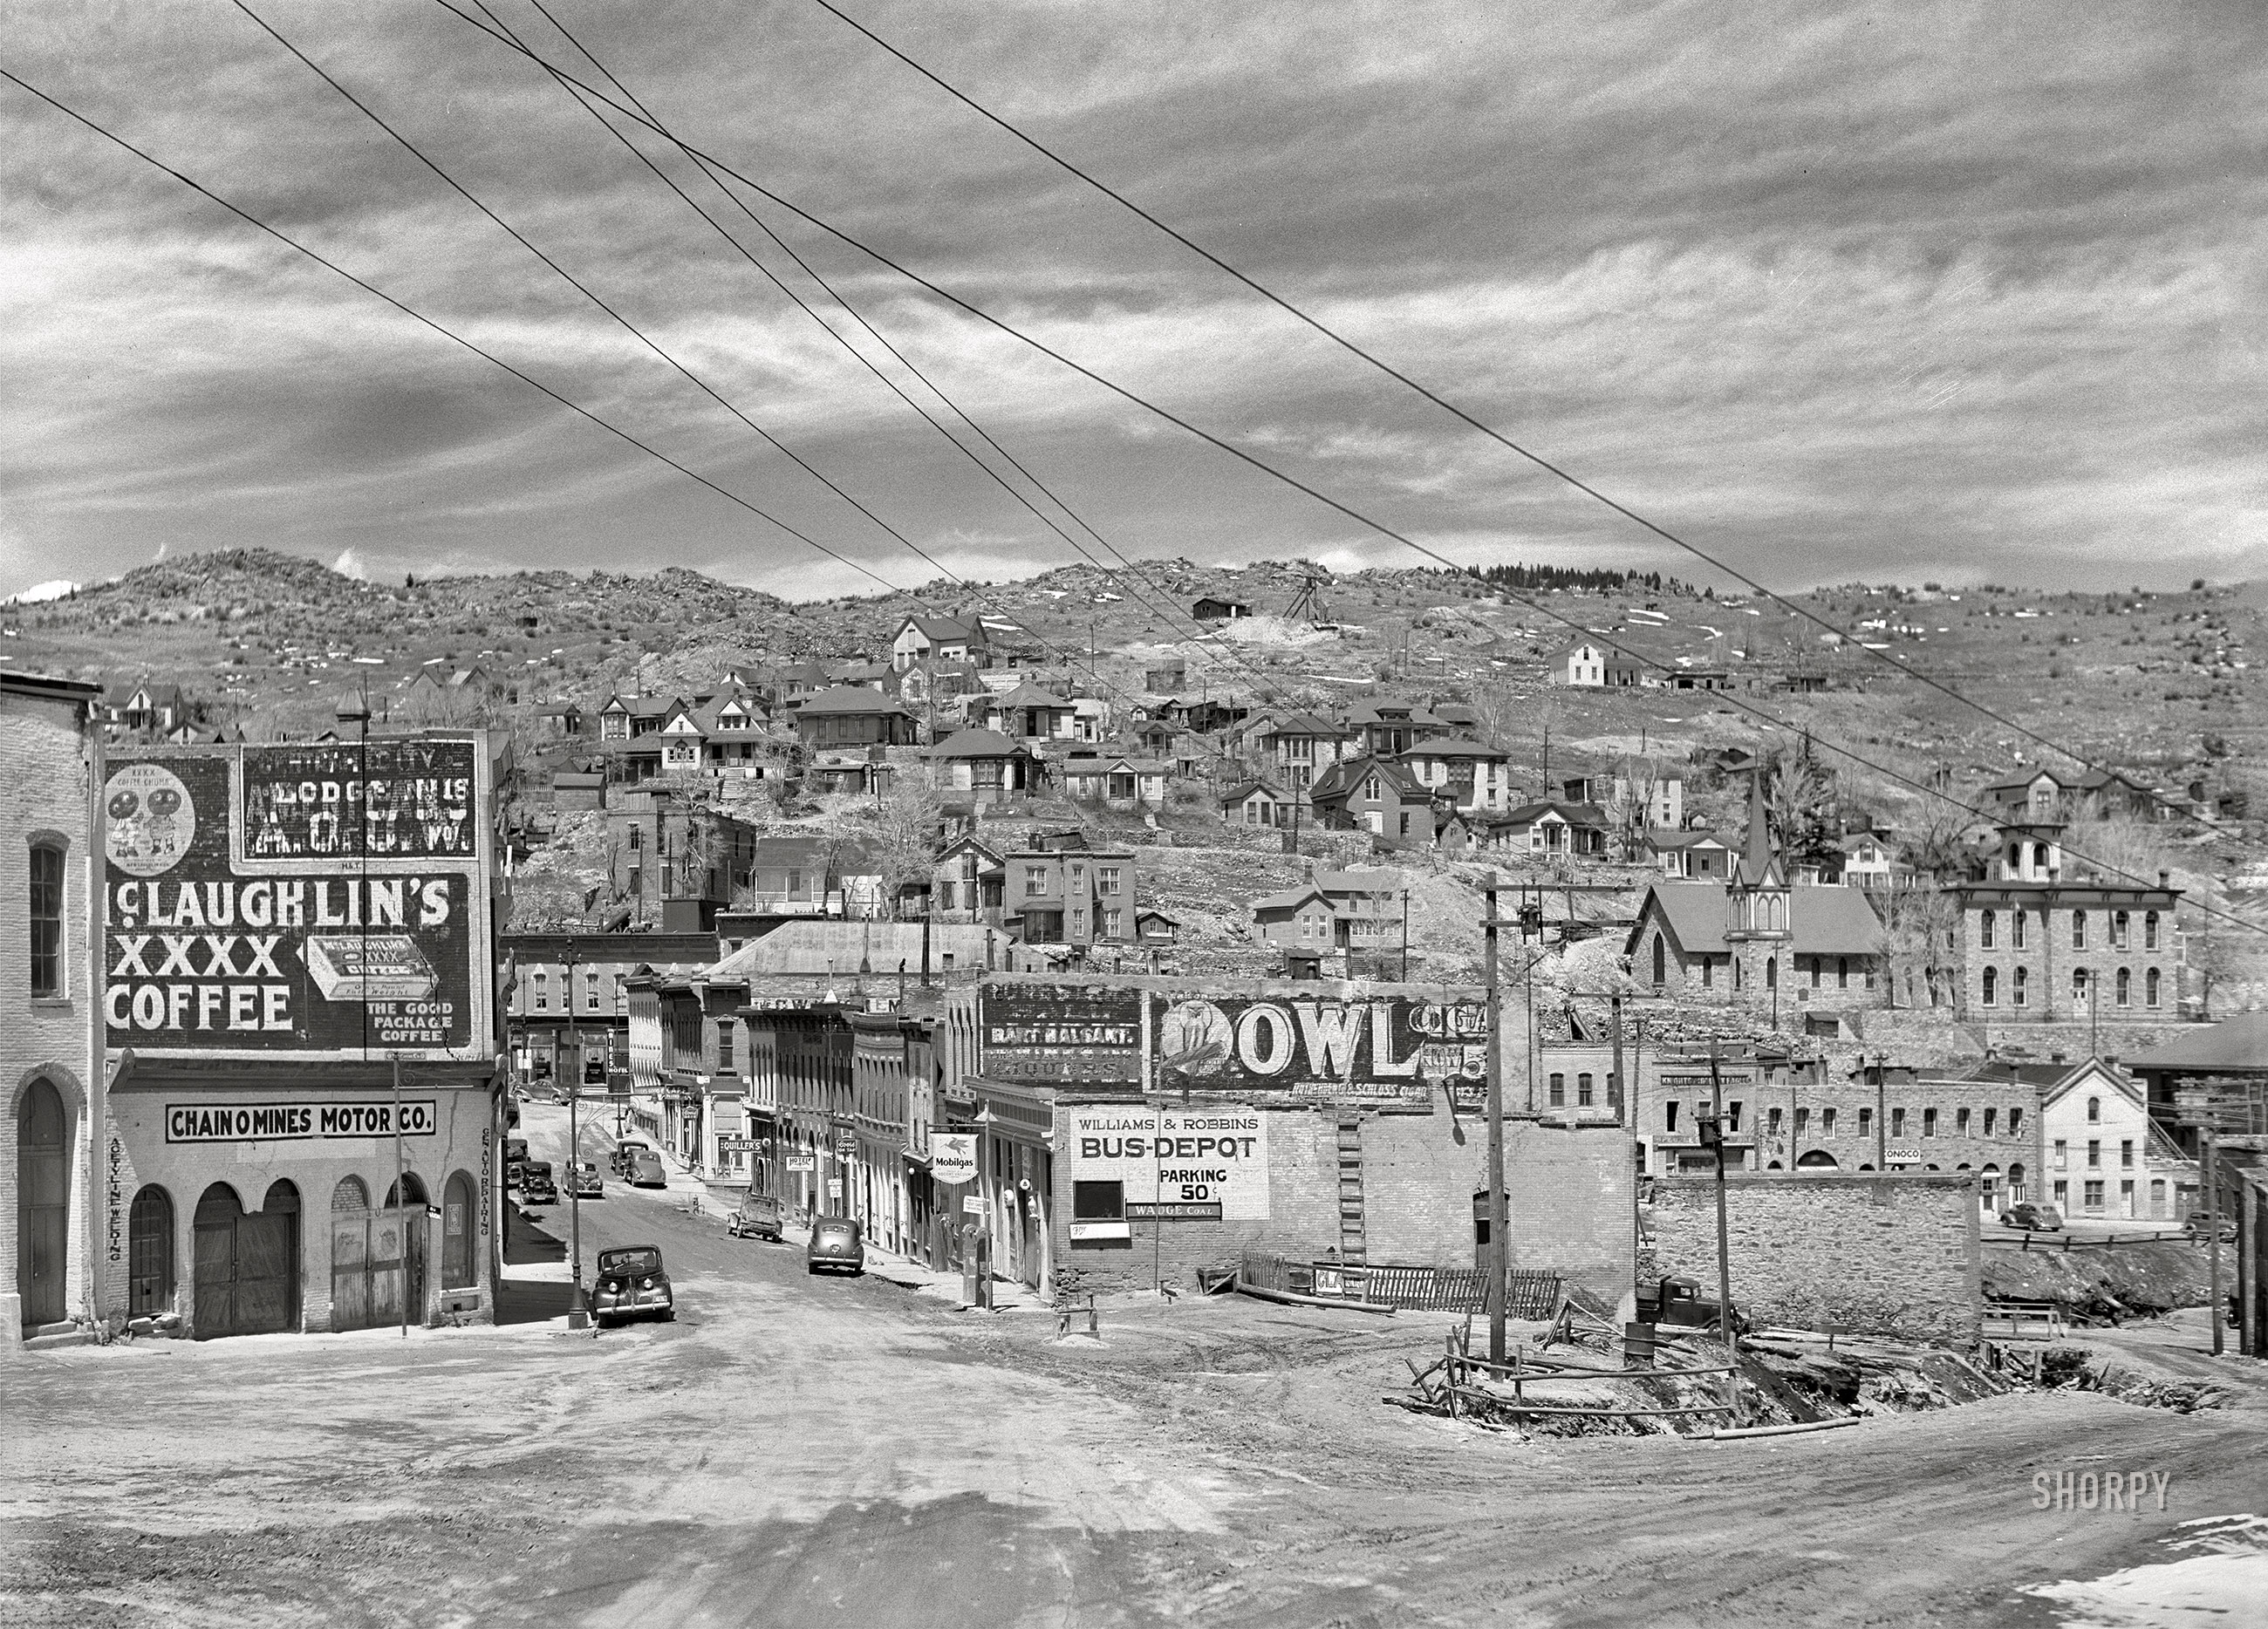 May 1942. "Central City, an old mining town in the mountainous region of Central Colorado." Acetate negative by John Vachon for the Farm Security Administration. View full size.